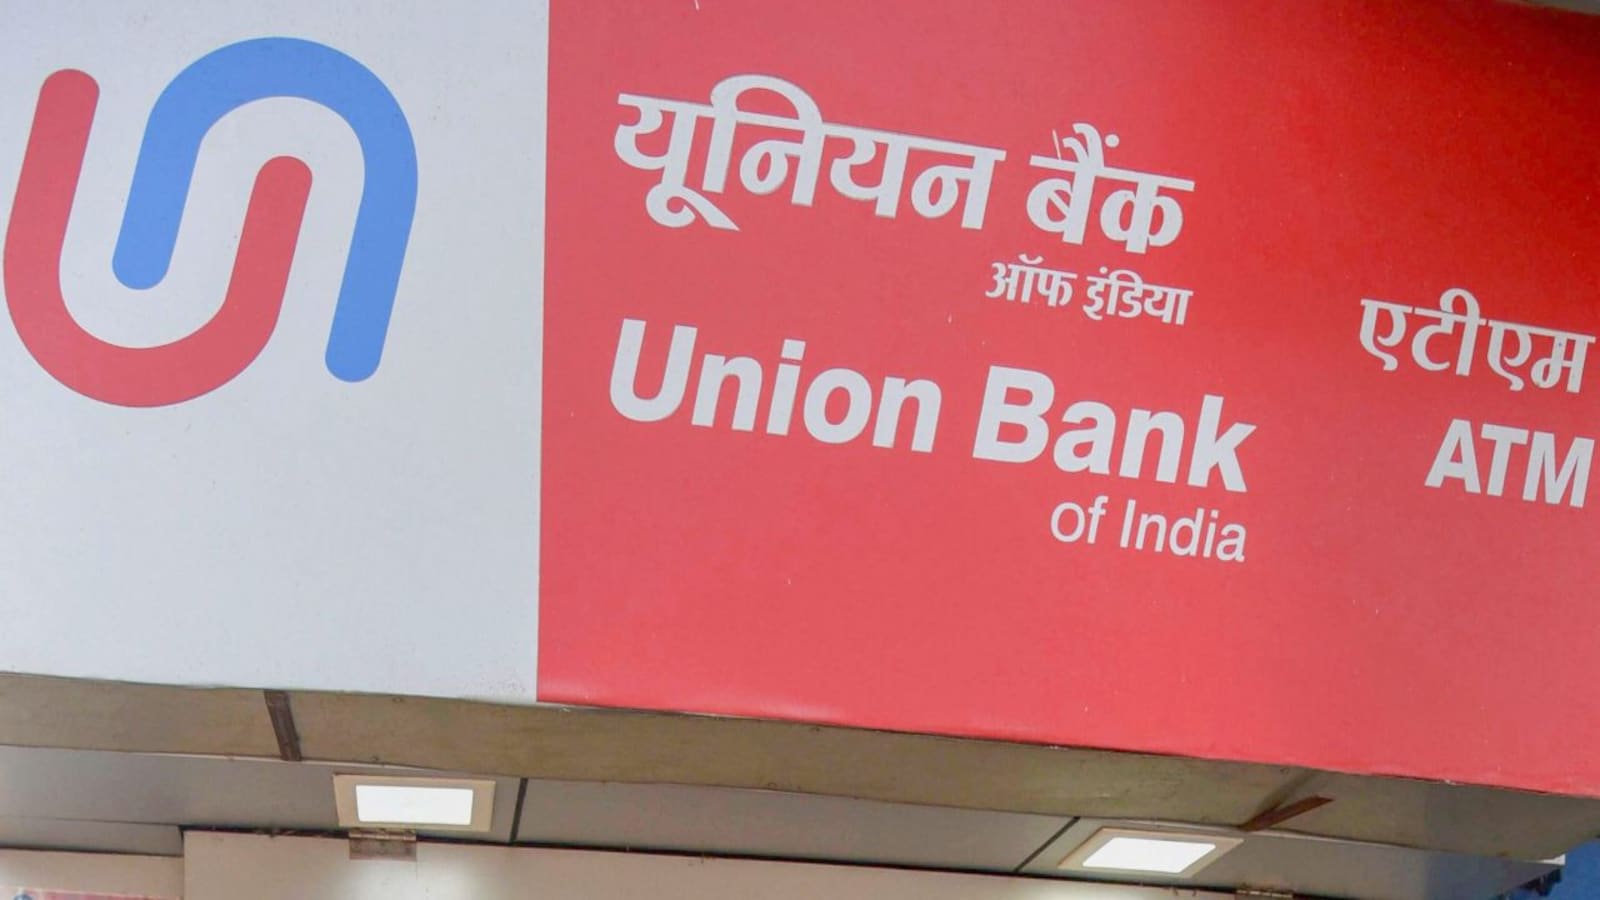 Union Bank of India Q2 Net Profit seen up 113.3% YoY to Rs. 1,102 cr: Motilal Oswal